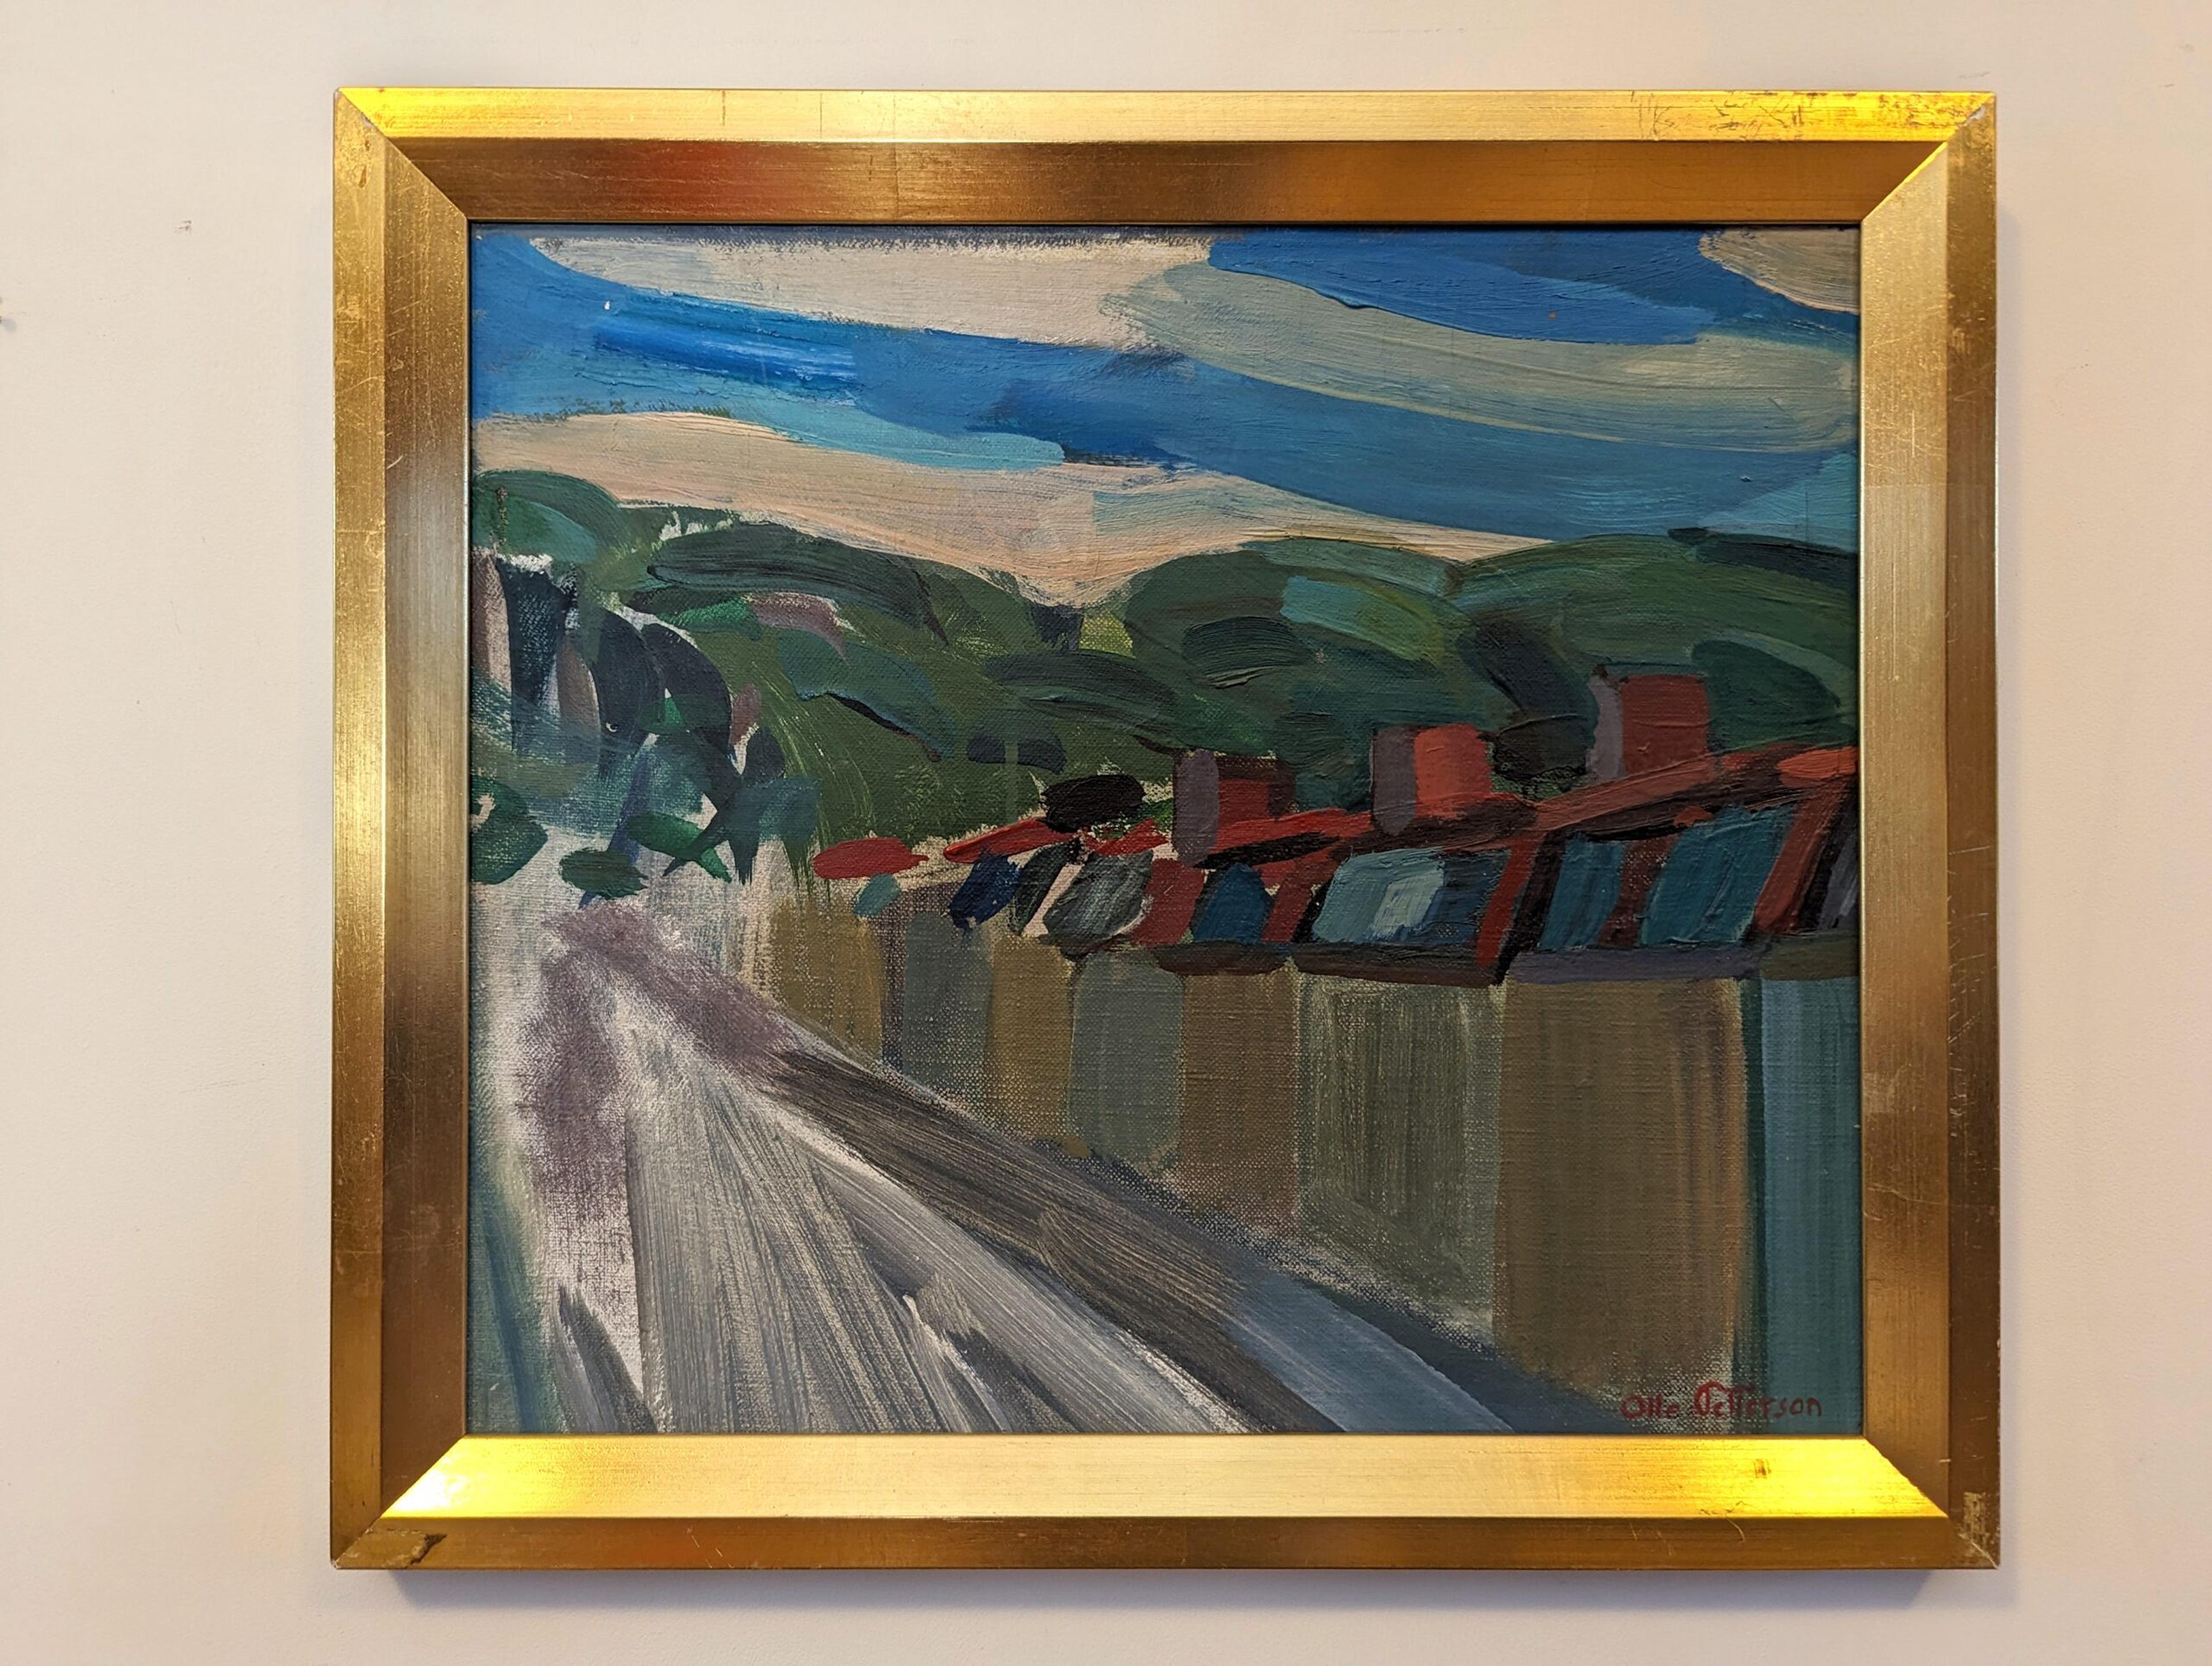 ROW OF HOUSES
Size: 31 x 35 cm (including frame)
Oil on Canvas Board

An expressive and lively mid-century modernist style composition, executed in oil onto canvas board.

Small yet impact in its composition, the painting presents a row of houses